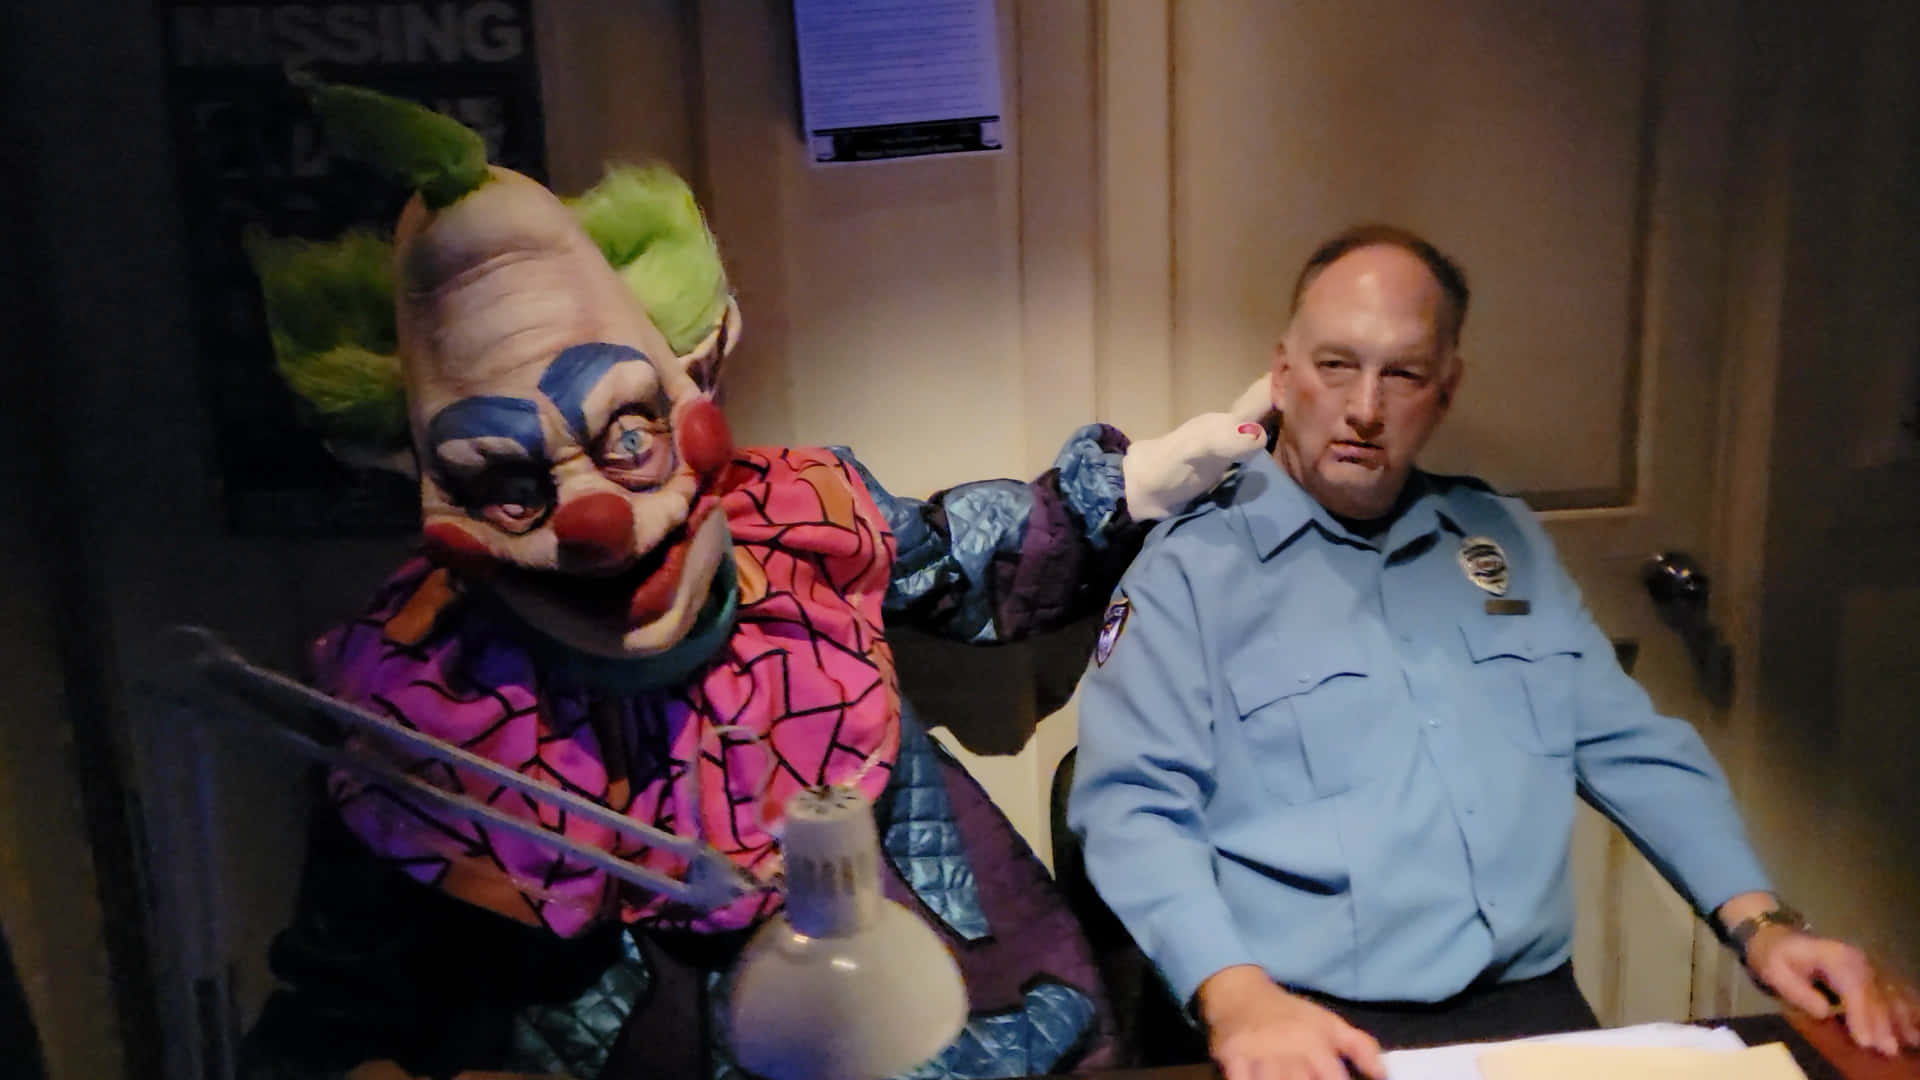 A Clown Dressed As A Police Officer Sits Next To A Desk Wallpaper